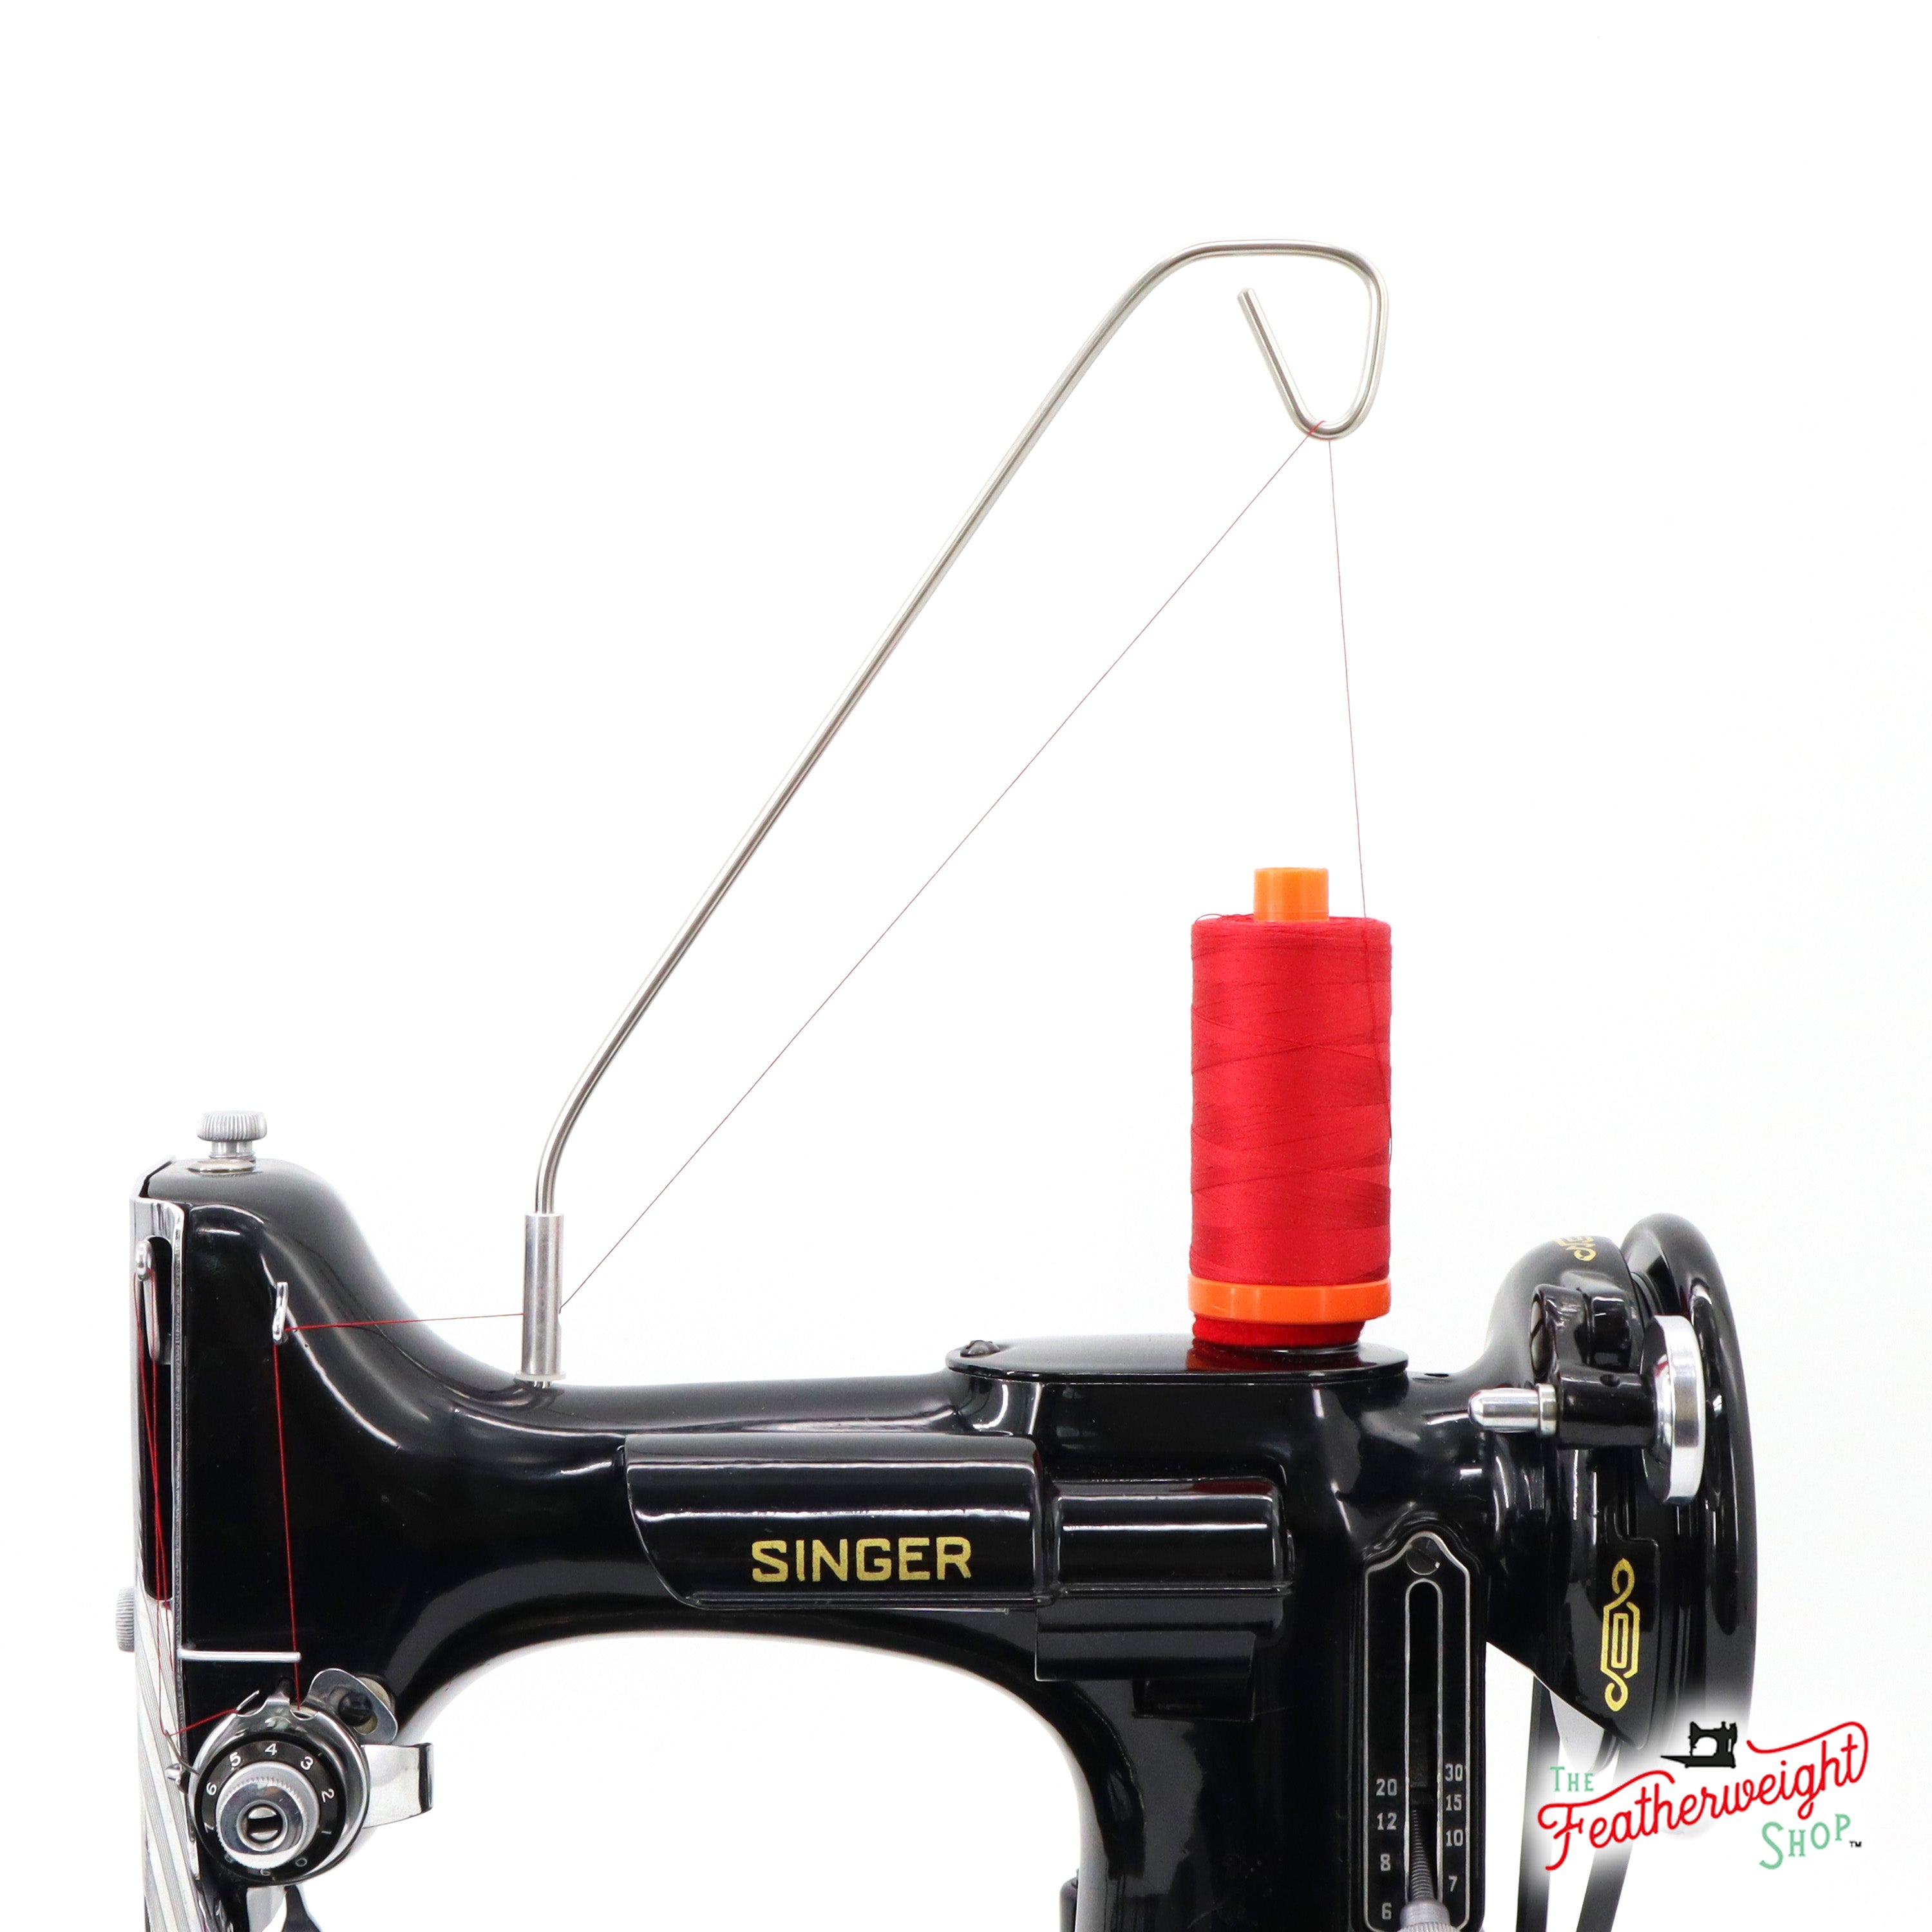 How To Choose Sewing Machine Thread? - News